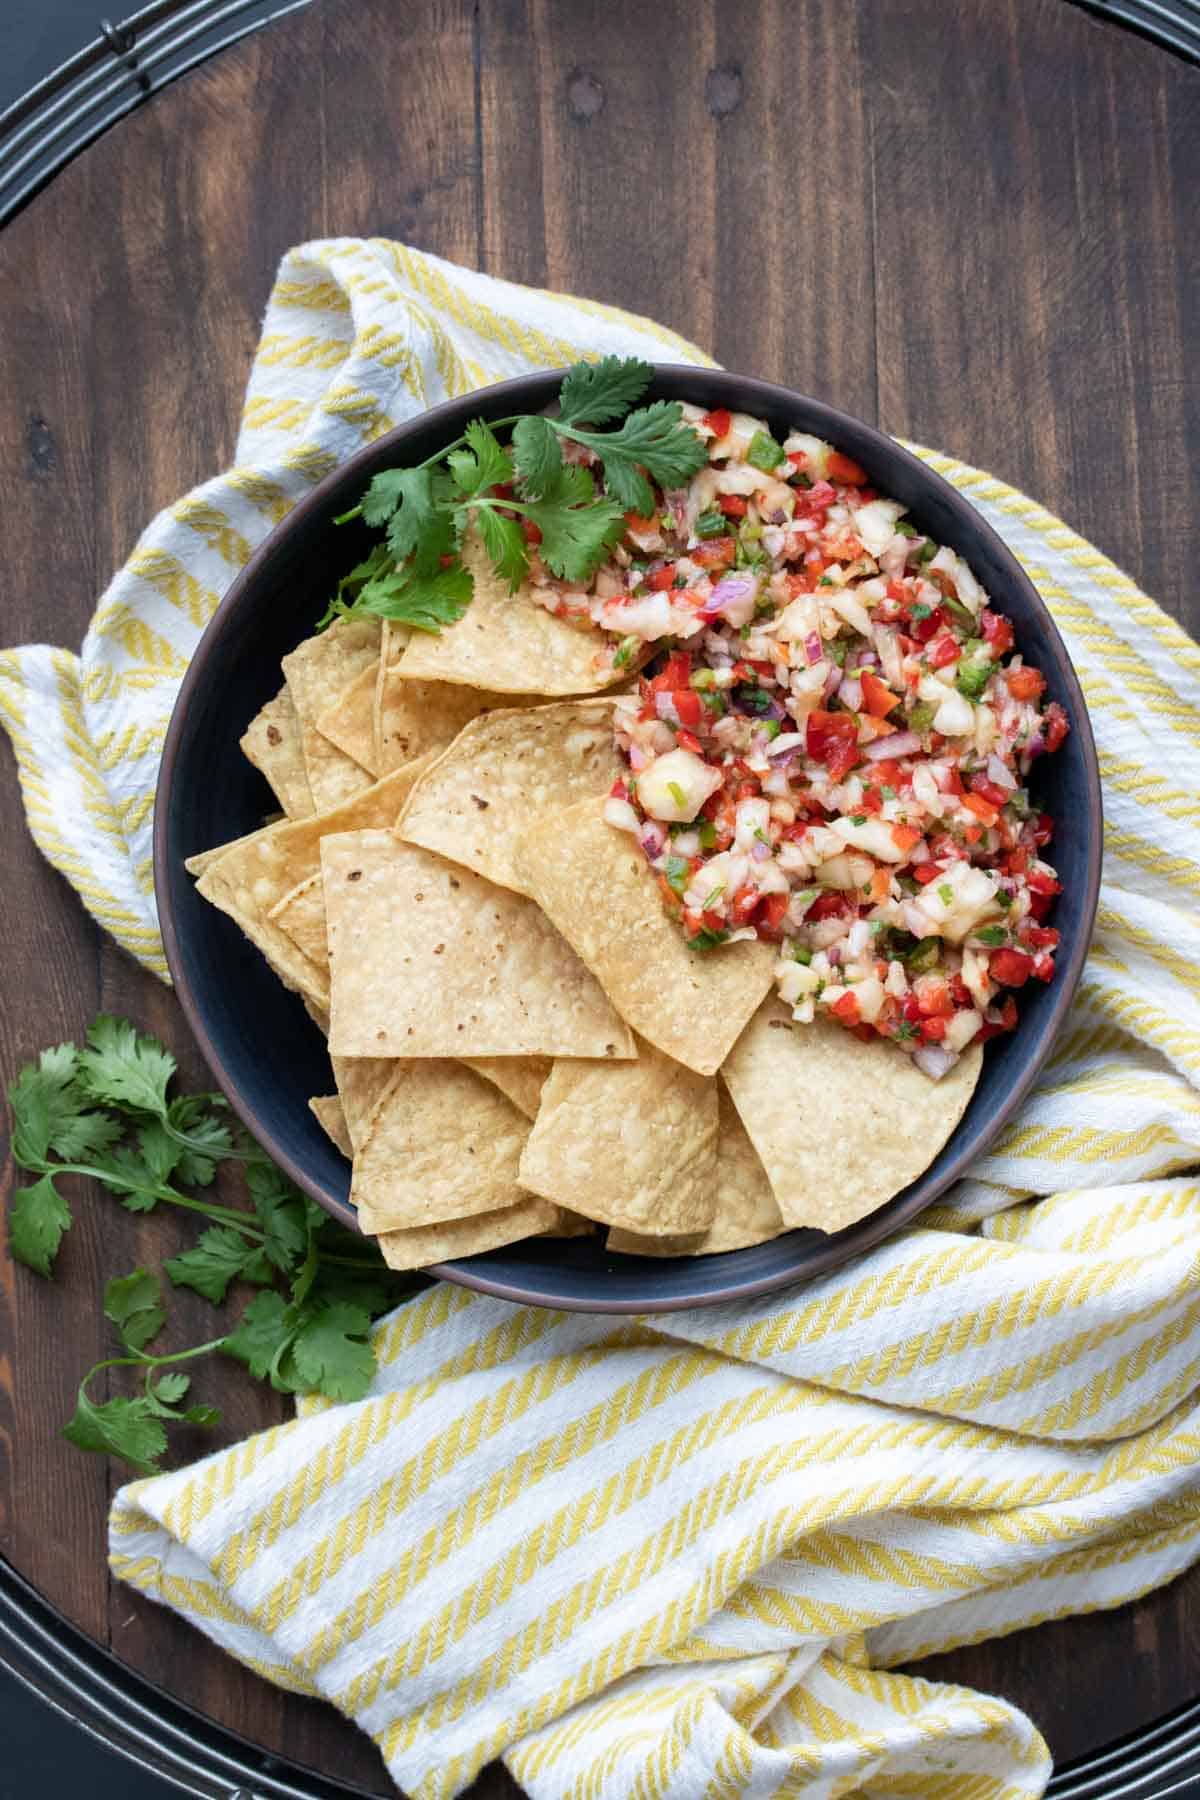 Black bowl filled with tortilla chips next to a pile of pineapple salsa